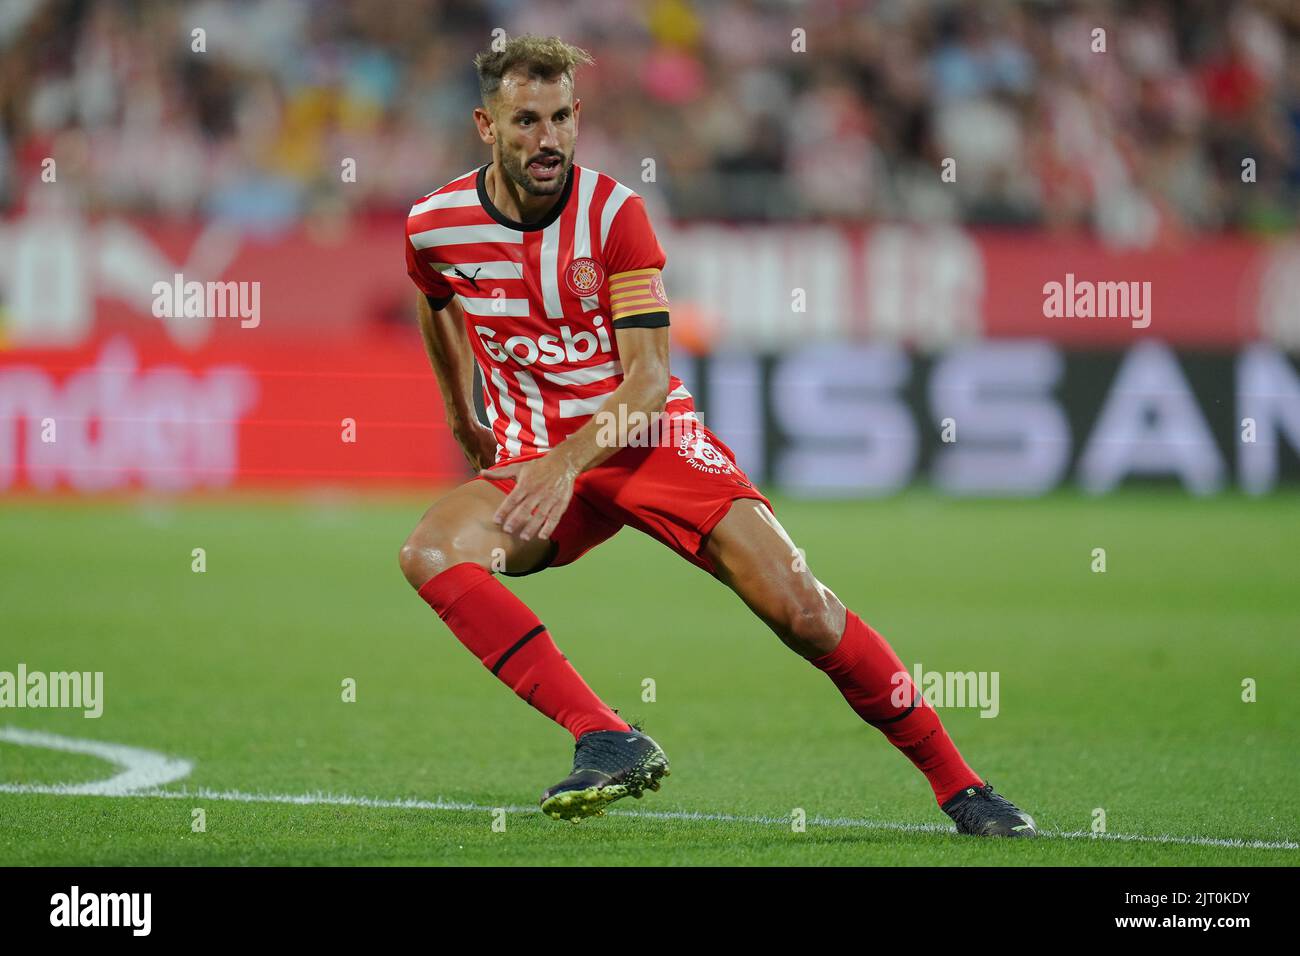 Cristhian Stuani of Girona FC during the La Liga match between Girona FC and RC Celta played at Montilivi Stadium on August 26, 2022 in Girona, Spain. (Photo by Sergio Ruiz / PRESSIN) Stock Photo